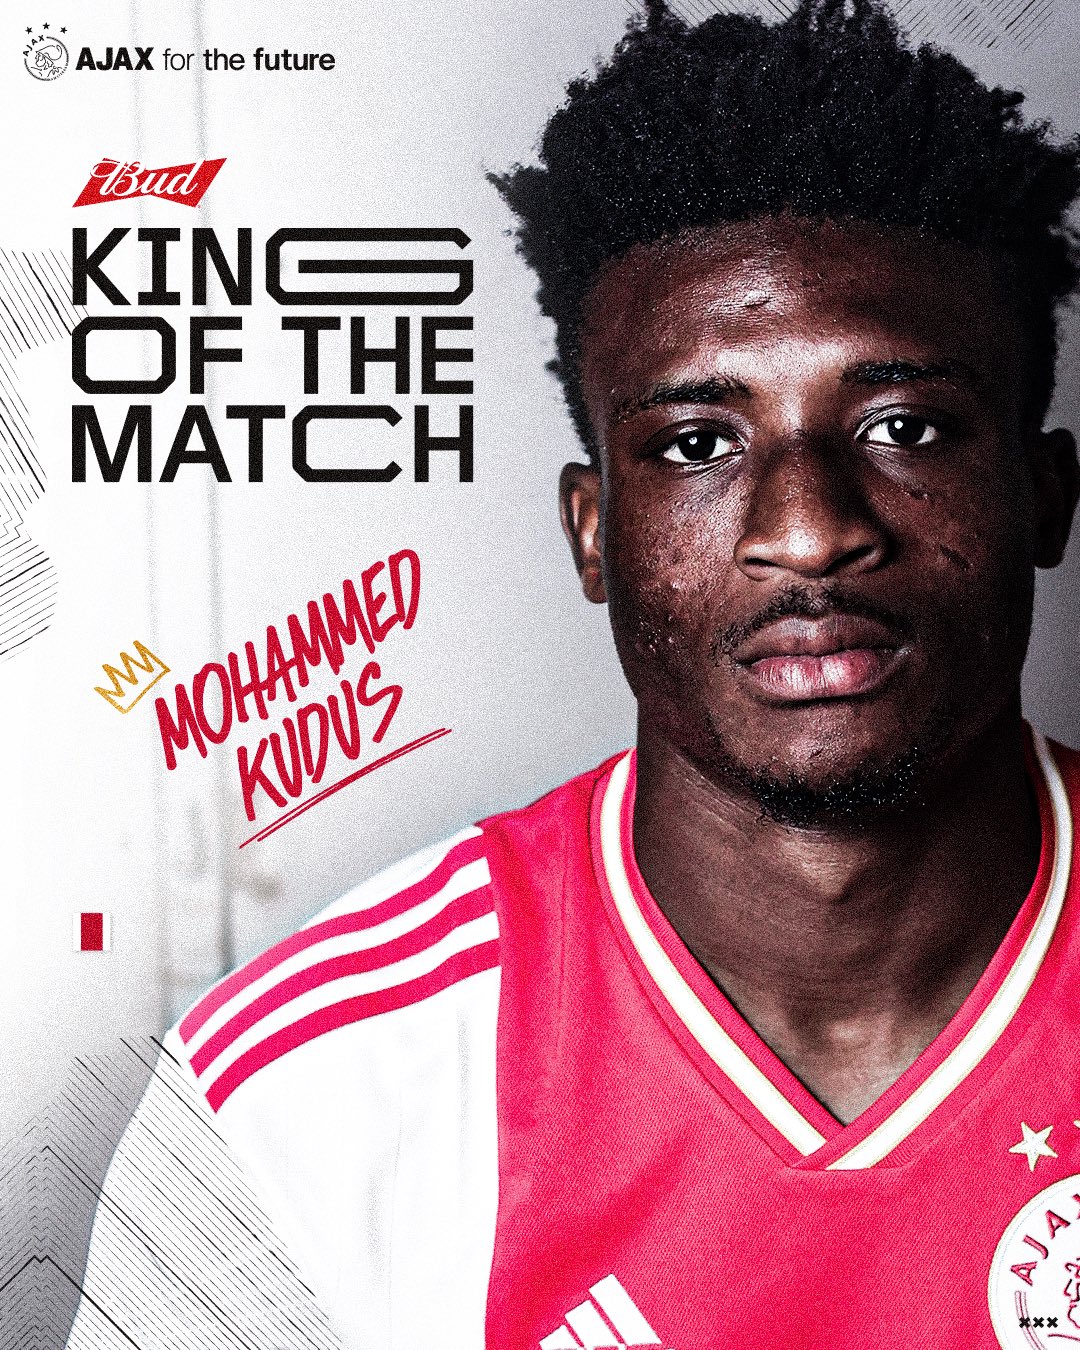 Ghana star Mohammed Kudus named ‘King of the Match’ after helping Ajax to beat Excelsior